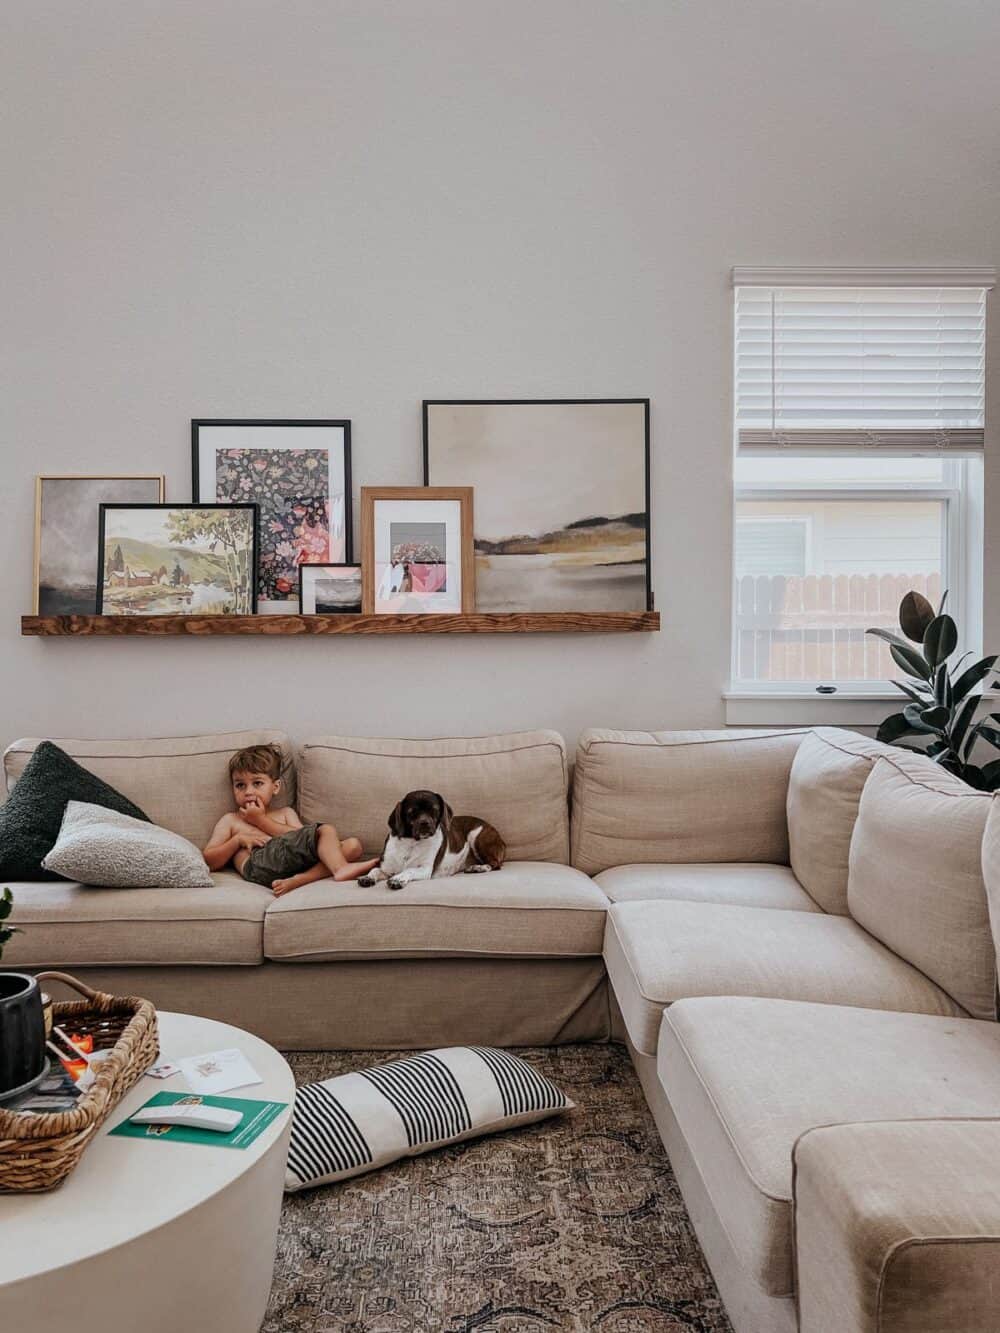 toddler lounging on a couch next to a dog